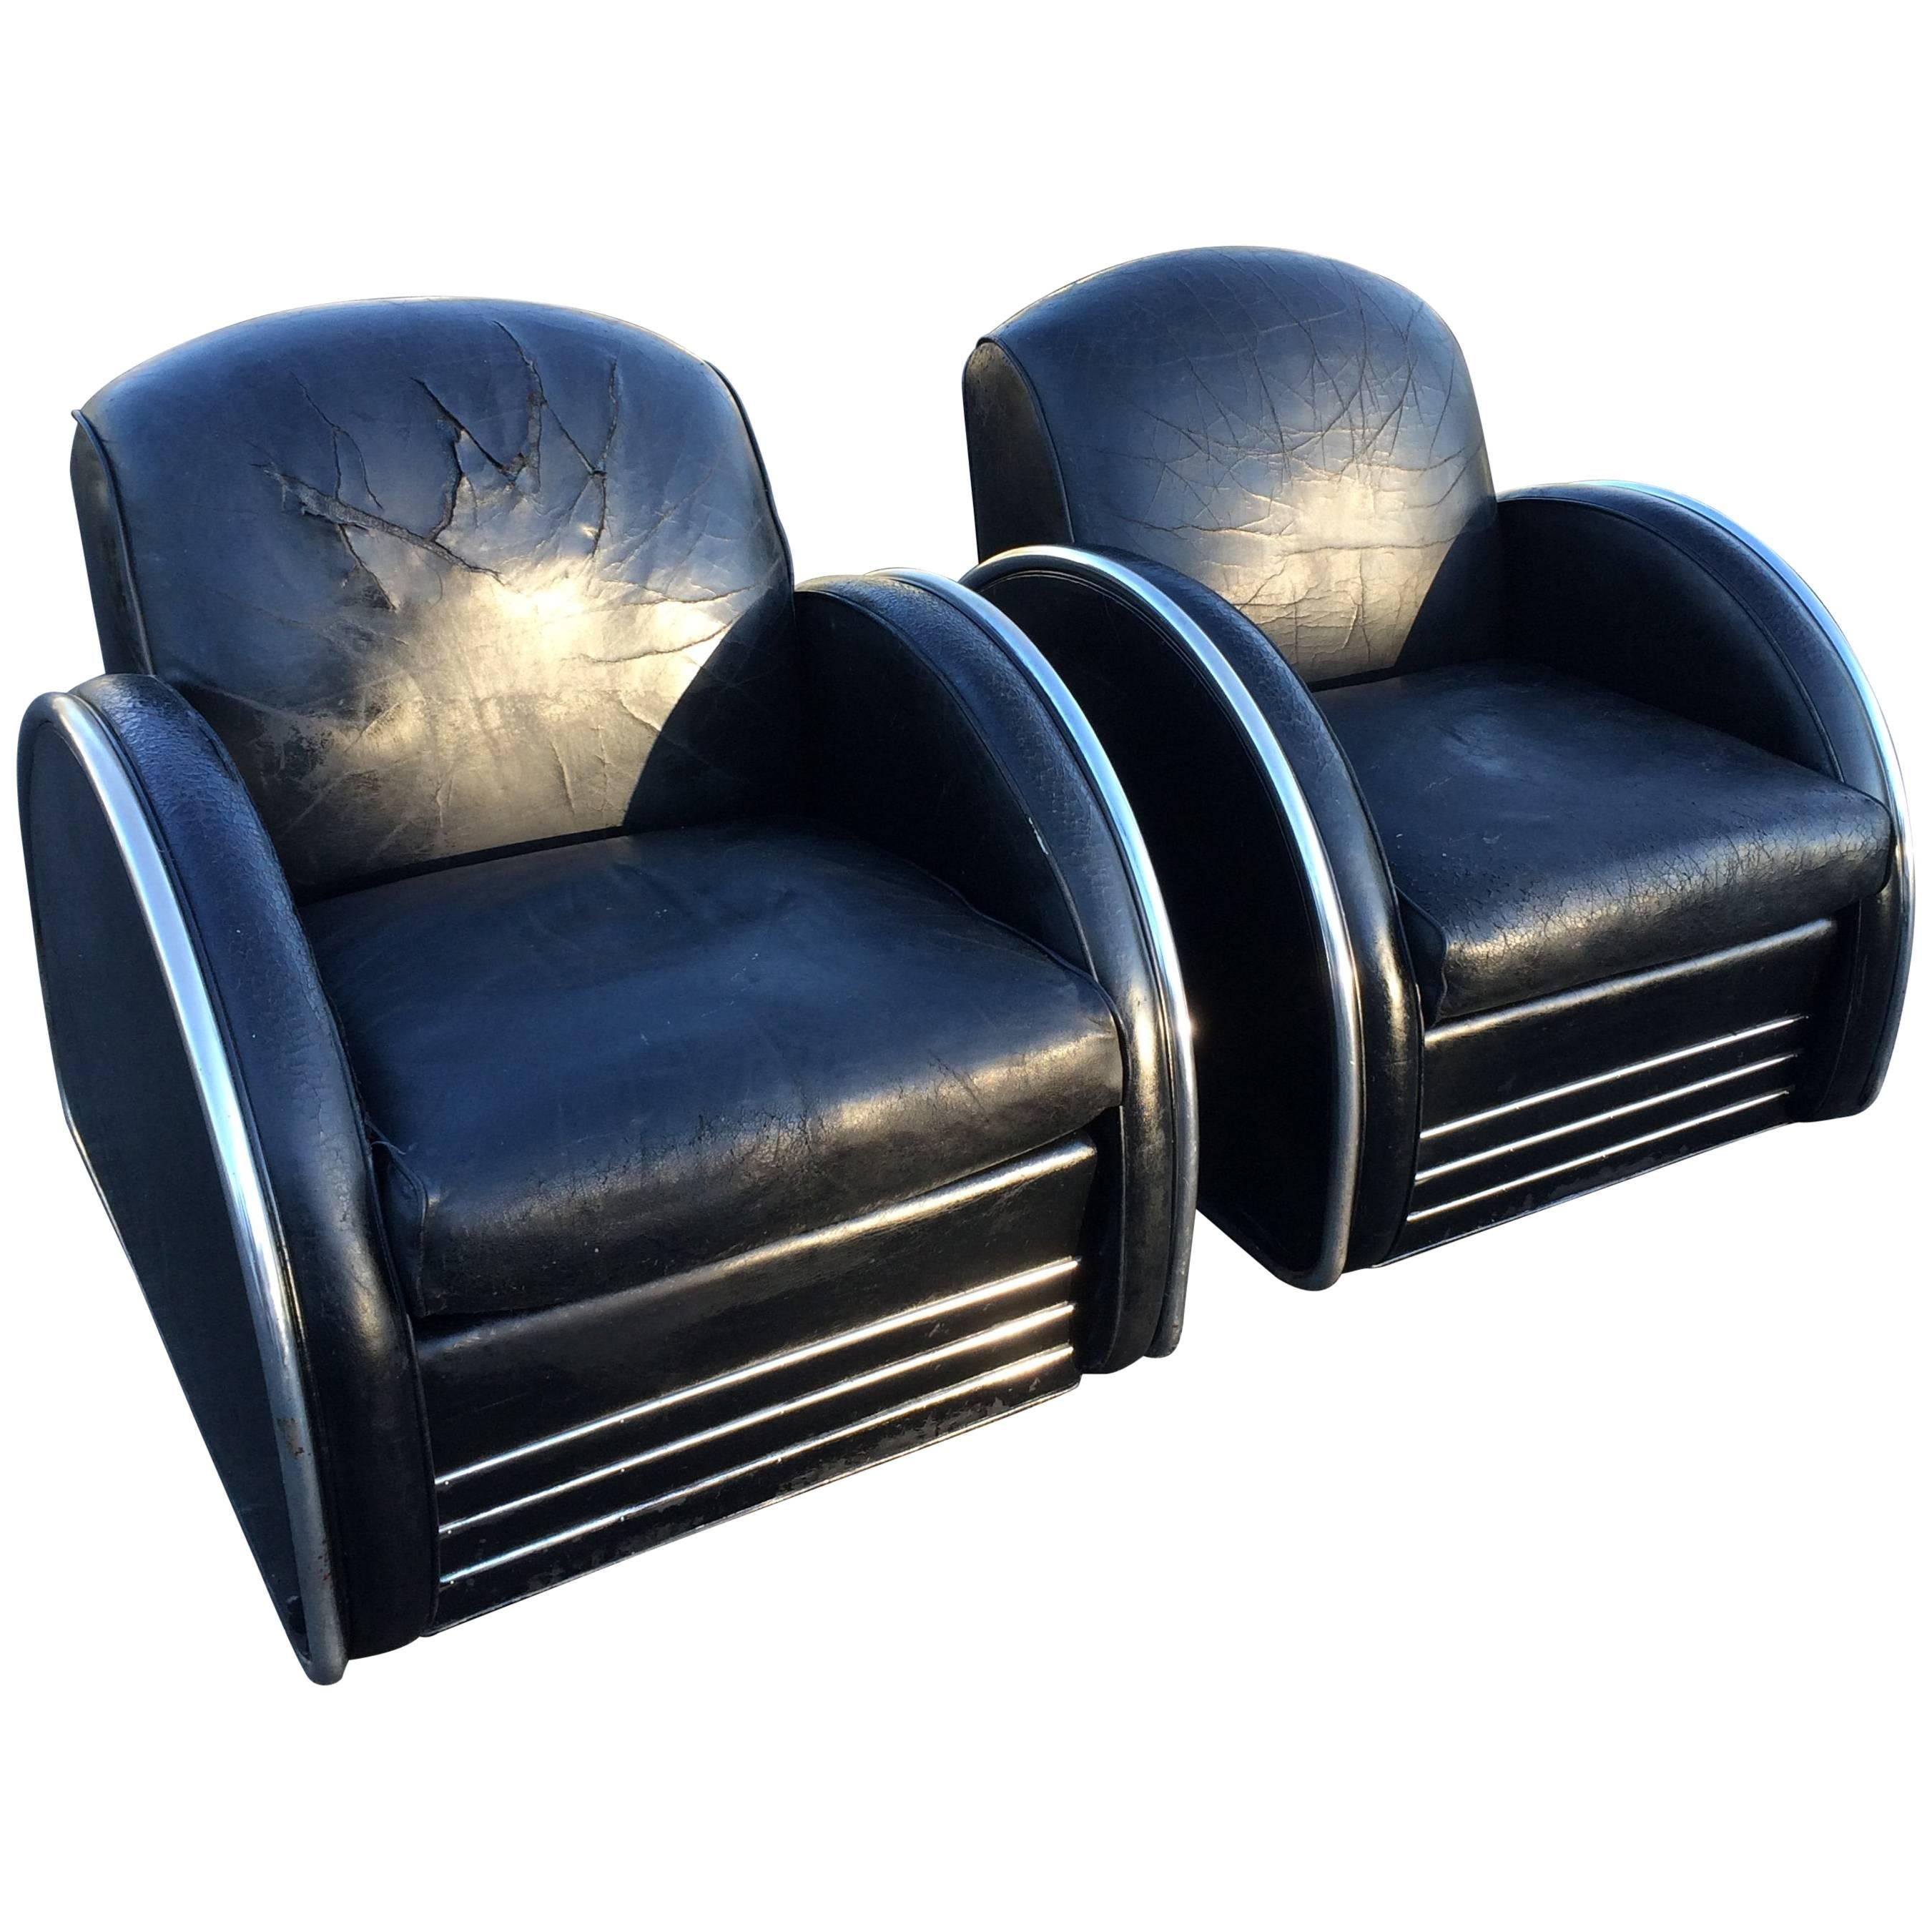 Pair of Distressed Leather Art Deco Club Chairs